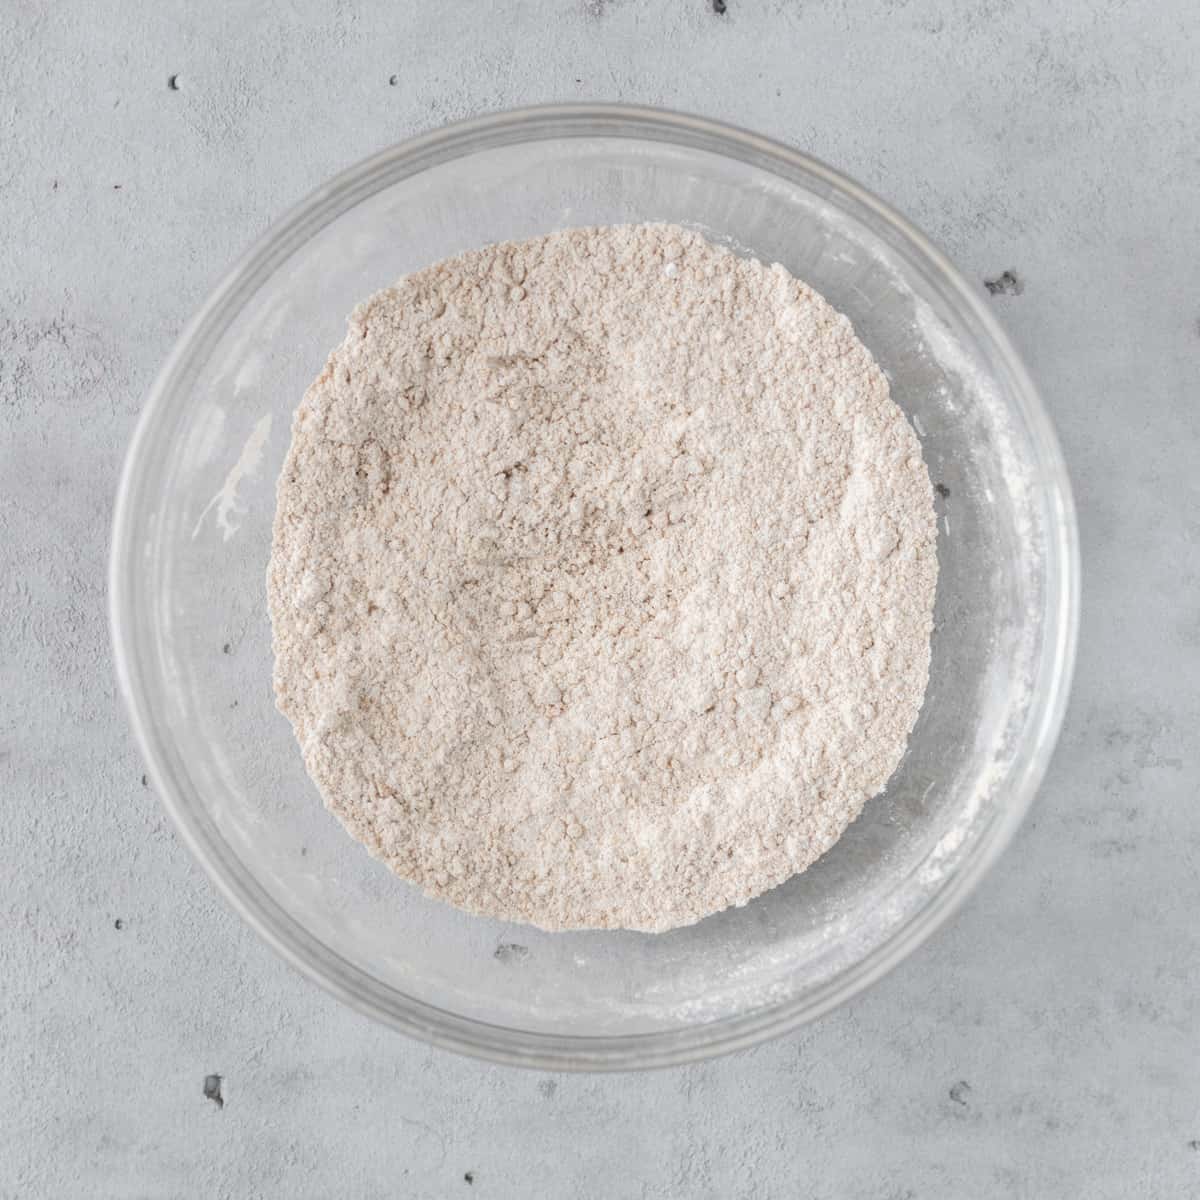 the dry ingredients combined in a glass bowl on a grey background.